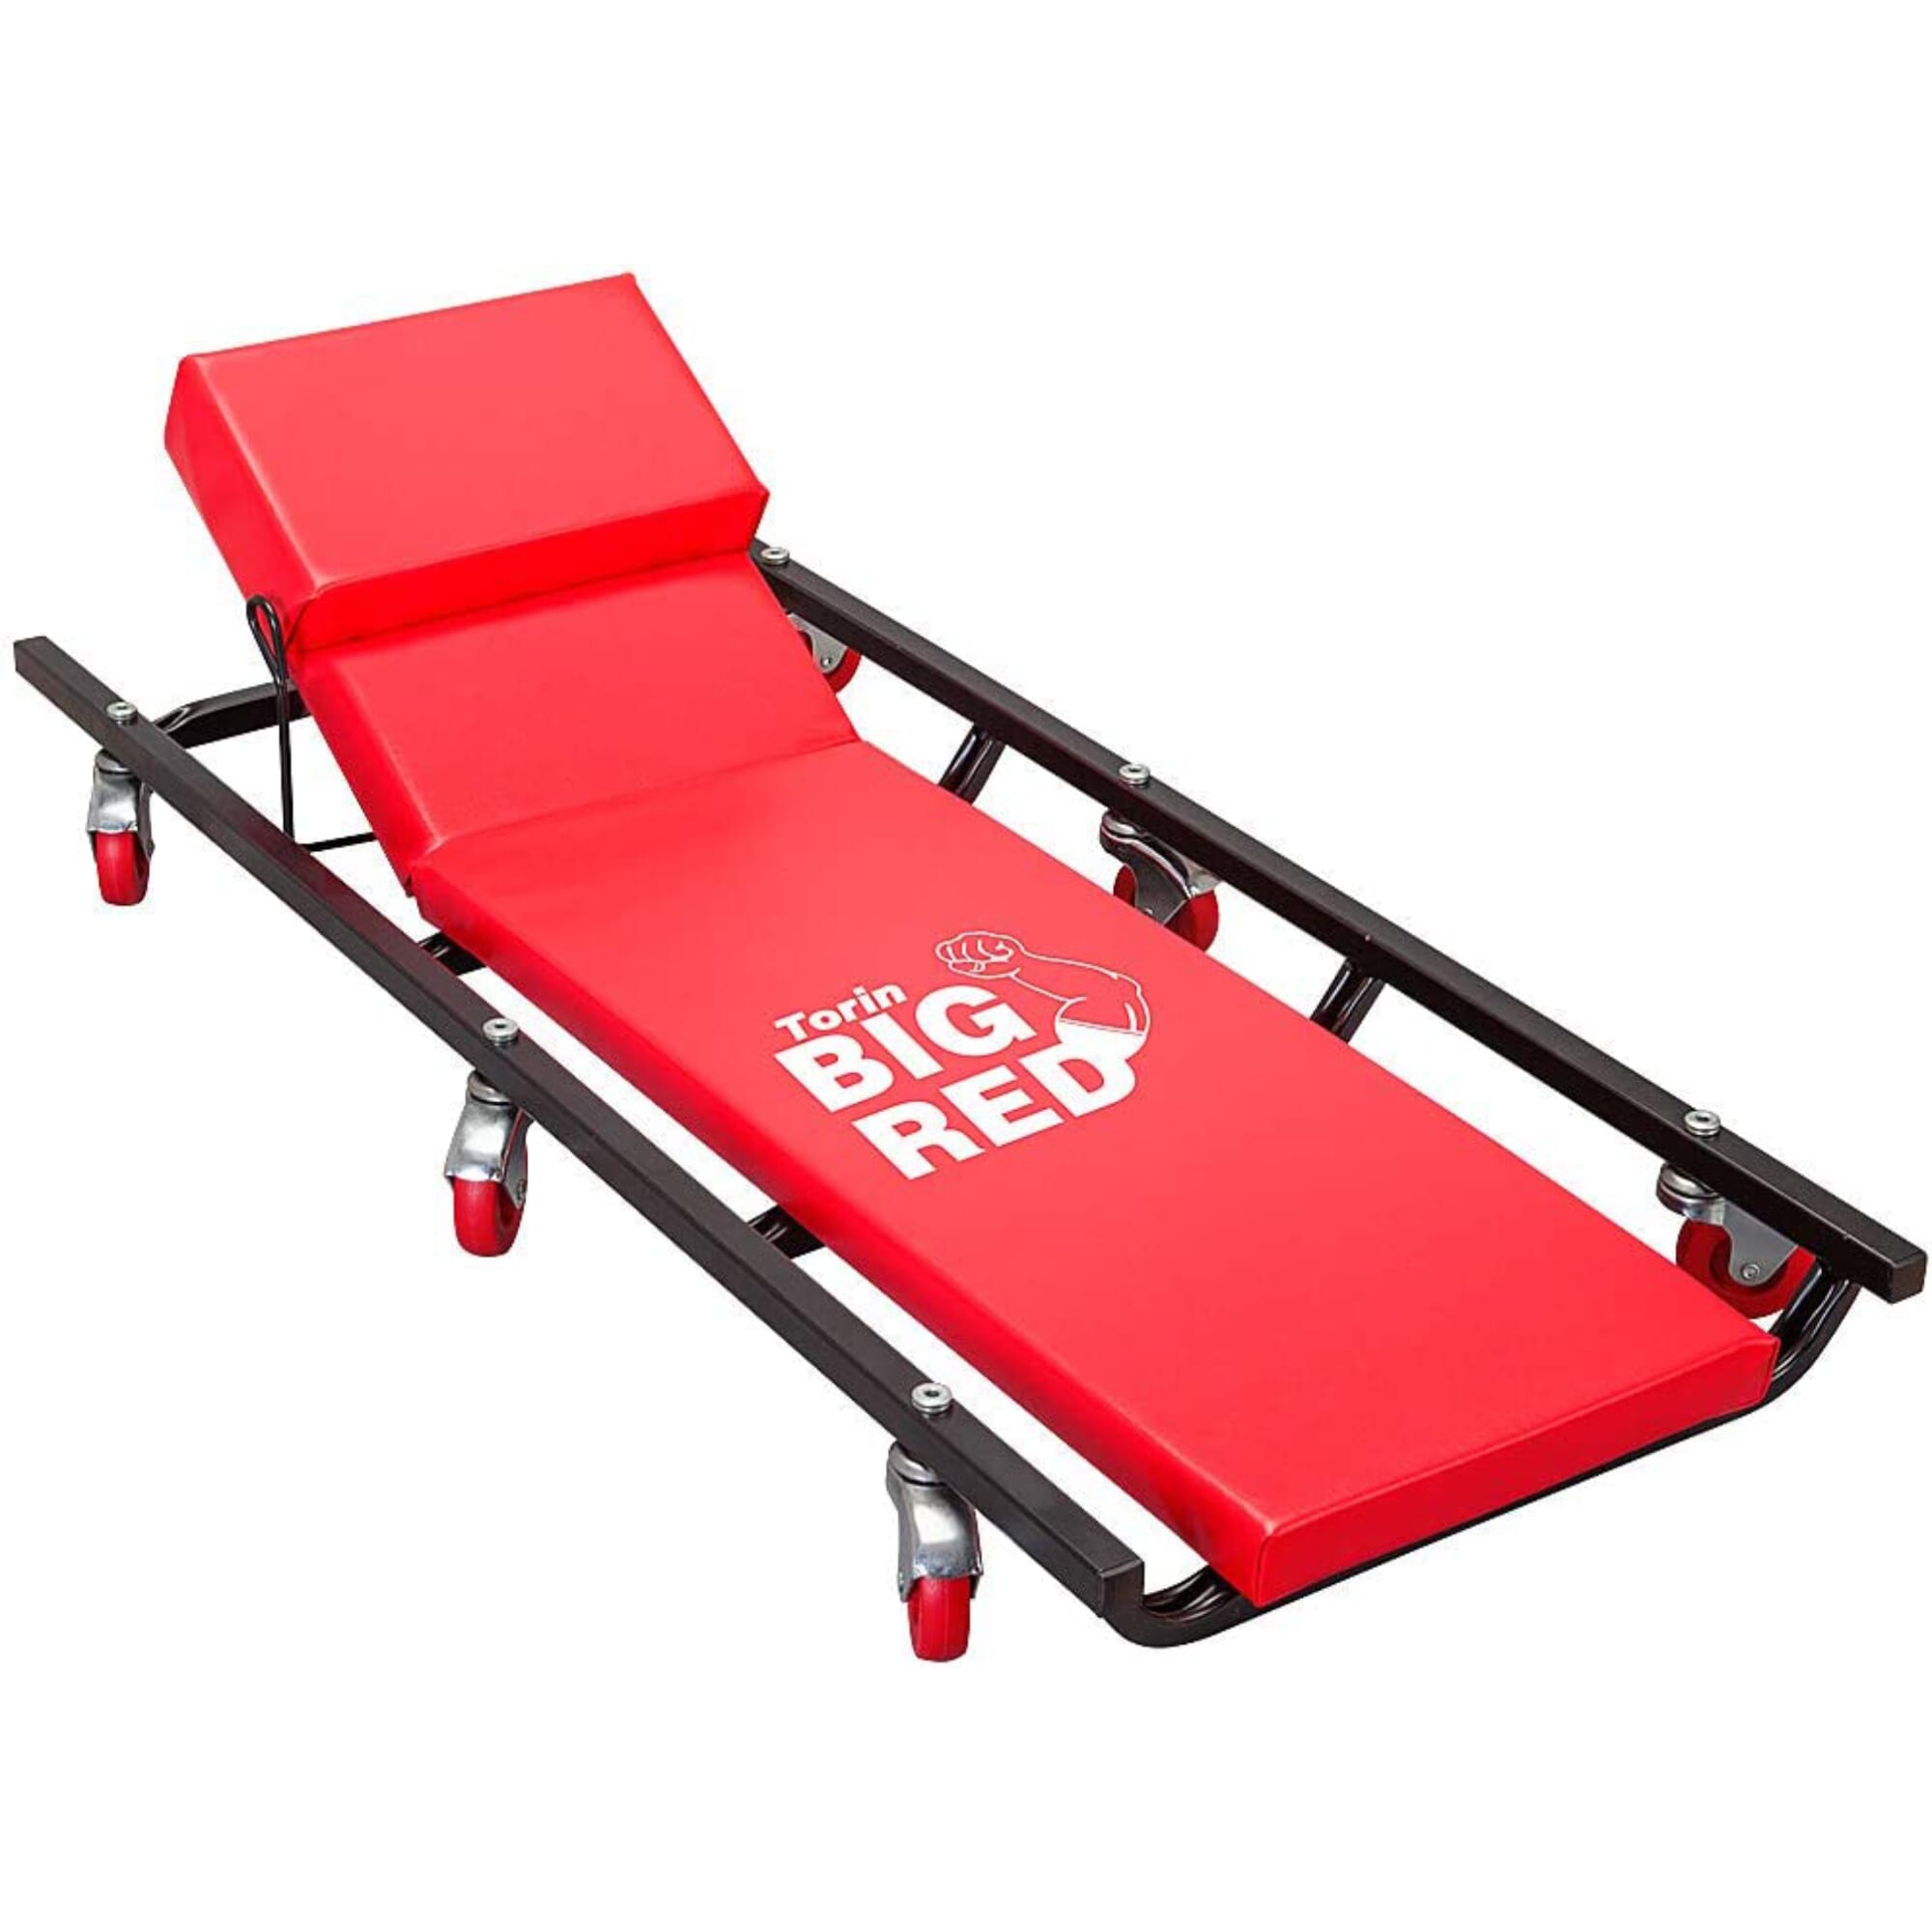 Torin - Big Red Tr6452 Steel Creeper 6 Wheels With Adjustable Head Rest